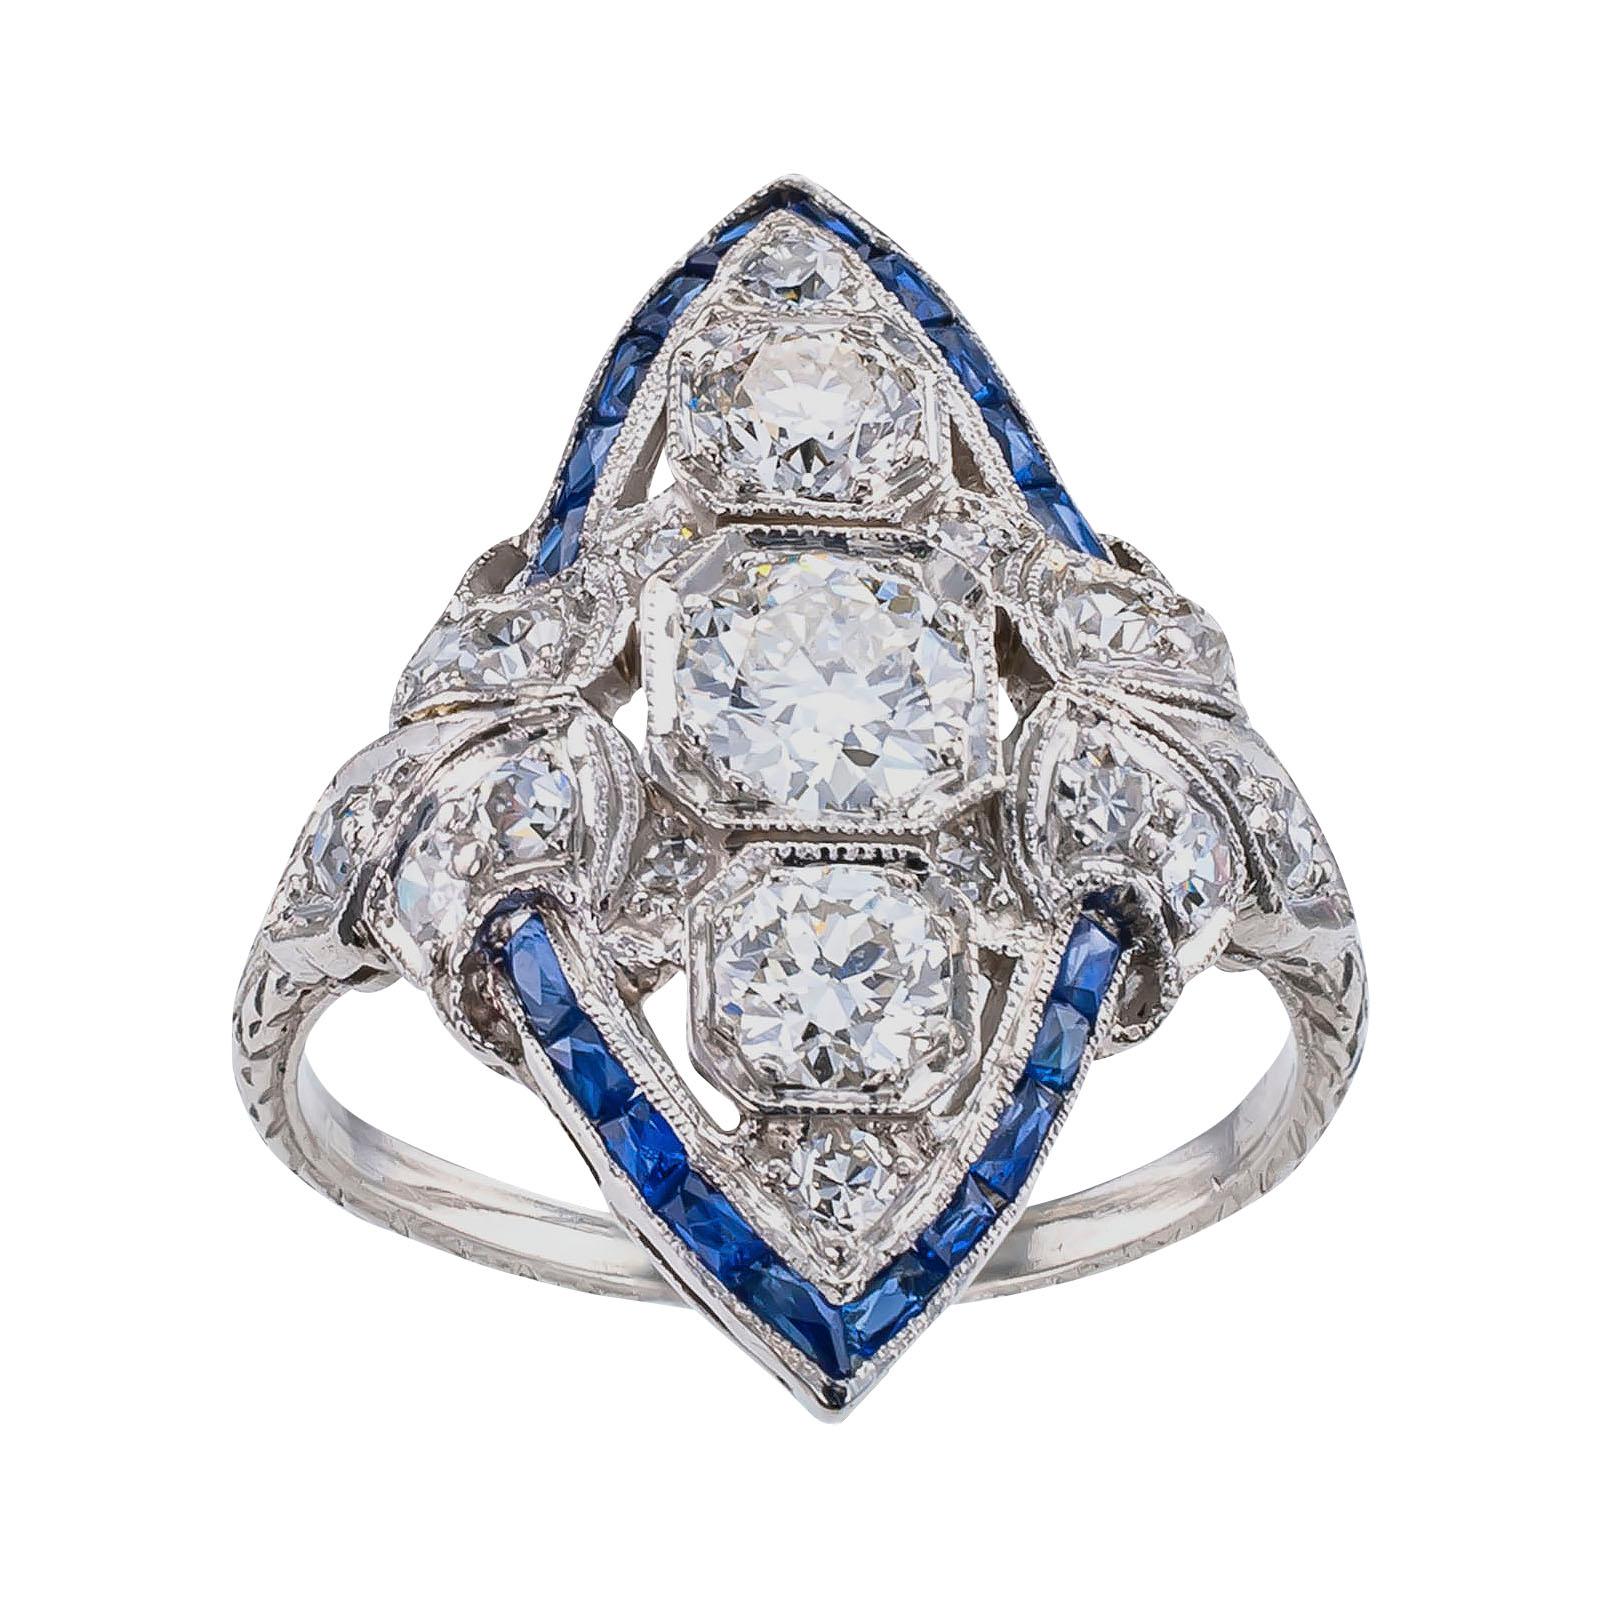 Art Deco diamond sapphire and platinum dinner ring circa 1925.

DETAILS:

DIAMONDS: nineteen old-cut circular diamonds totaling approximately 1.20 carats, approximately H – J color and VS – SI clarity.

GEMSTONES: French-cut blue sapphires.

METAL: